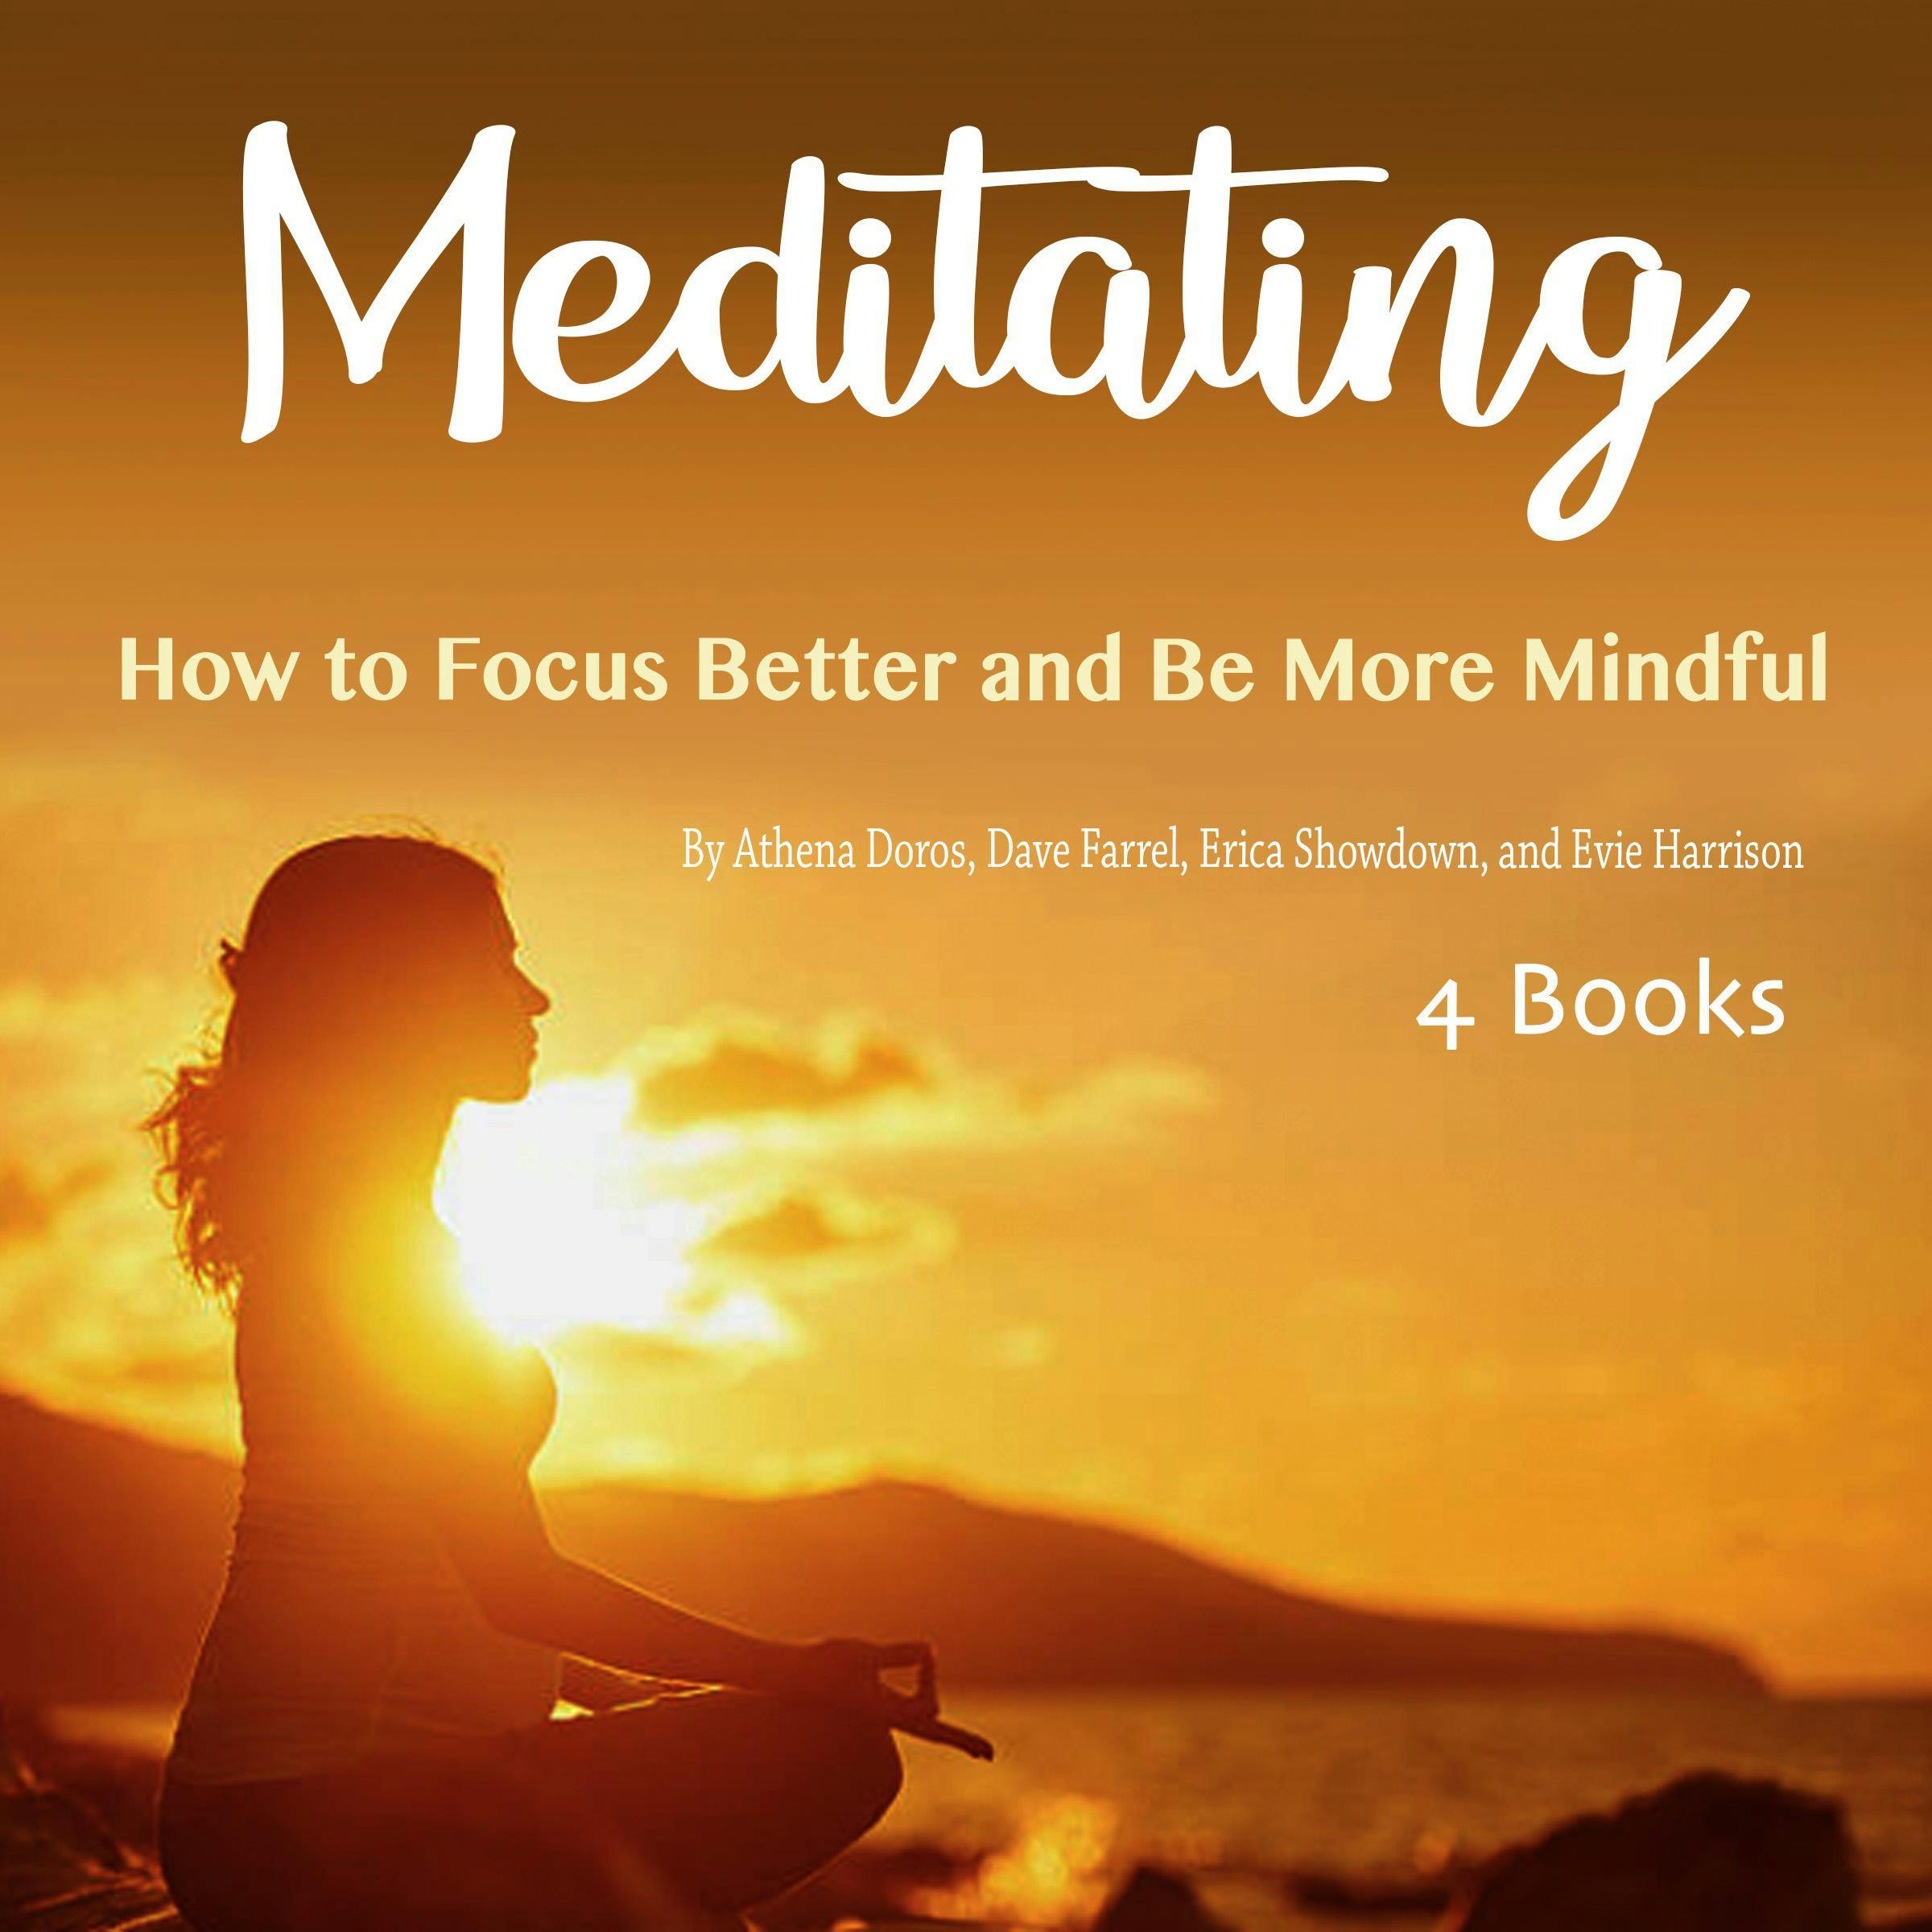 Meditating: How to Focus Better and Be More Mindful - Athena Doros, Erica Showdown, Dave Farrel, Evie Harrison